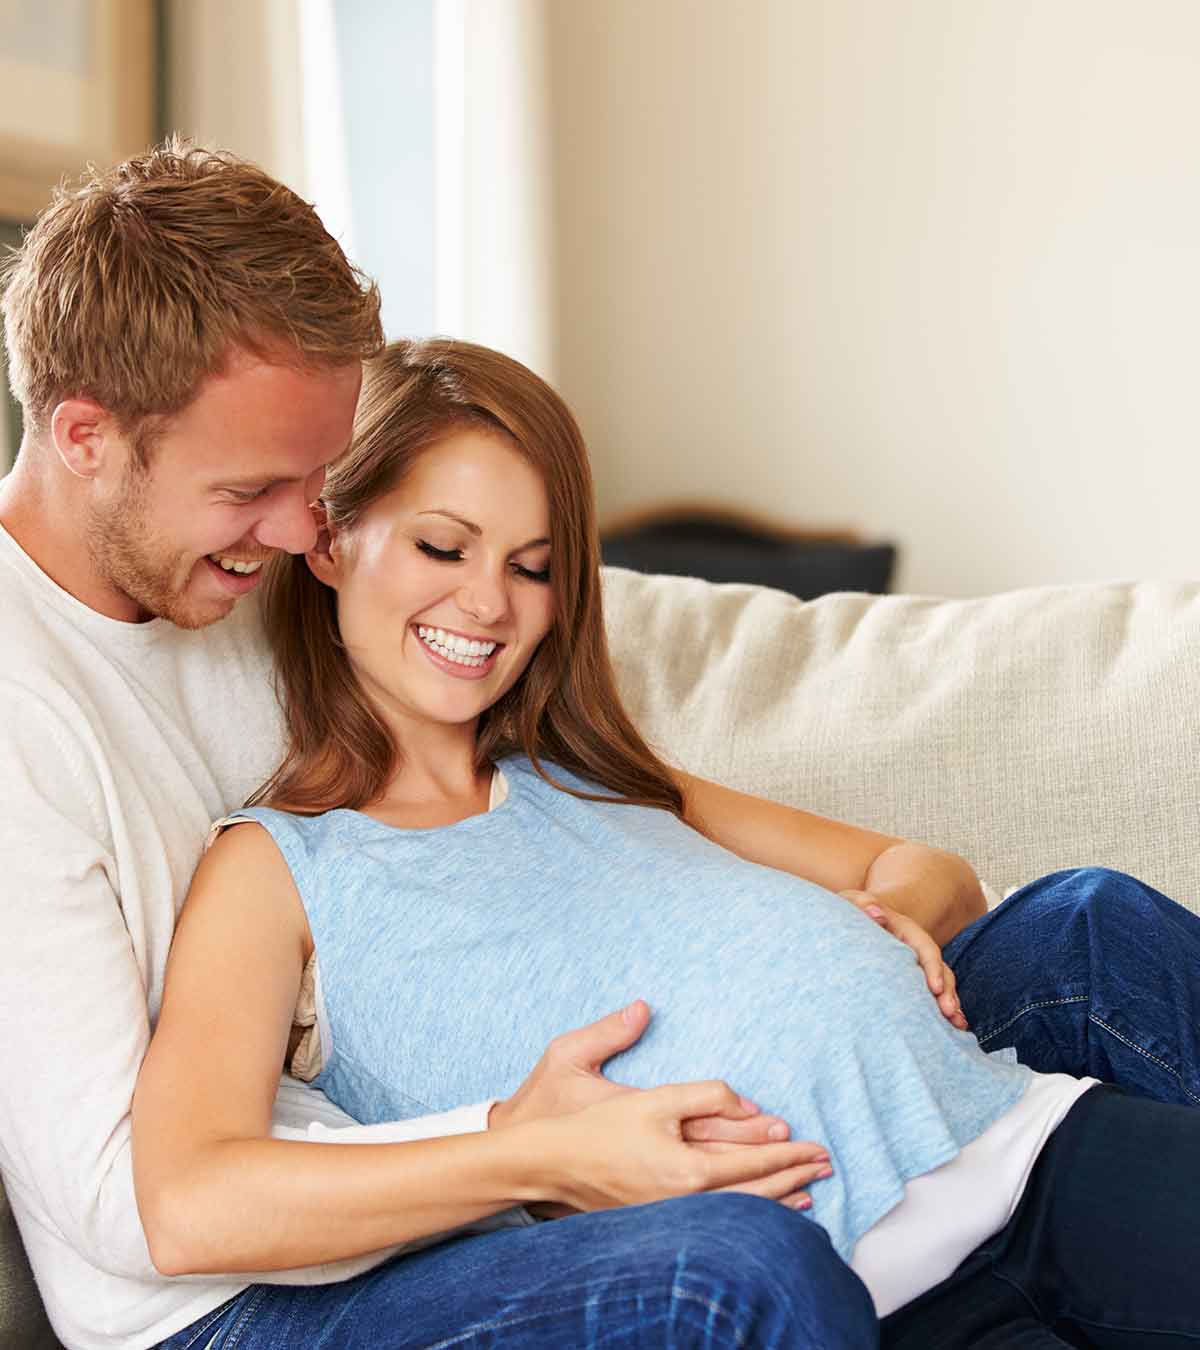 Here’s How Pregnancy Changes Your Relationship With Your Partner